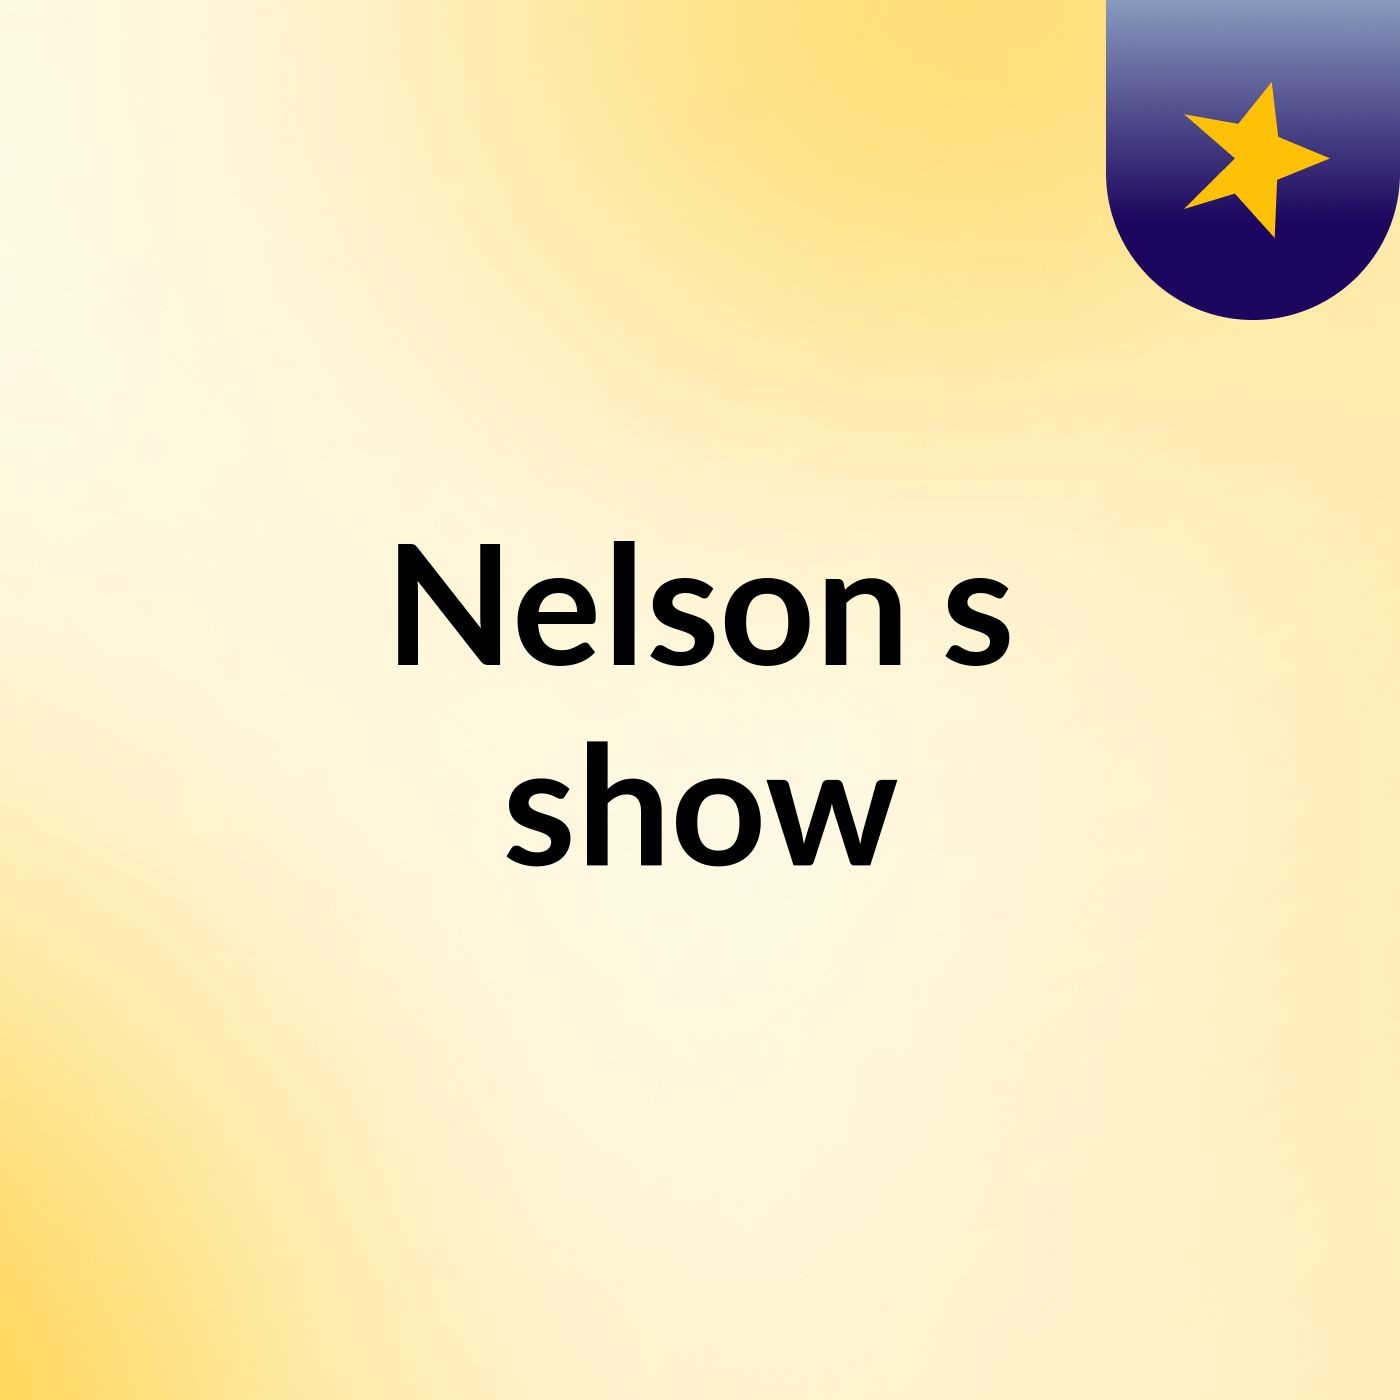 Nelson's show